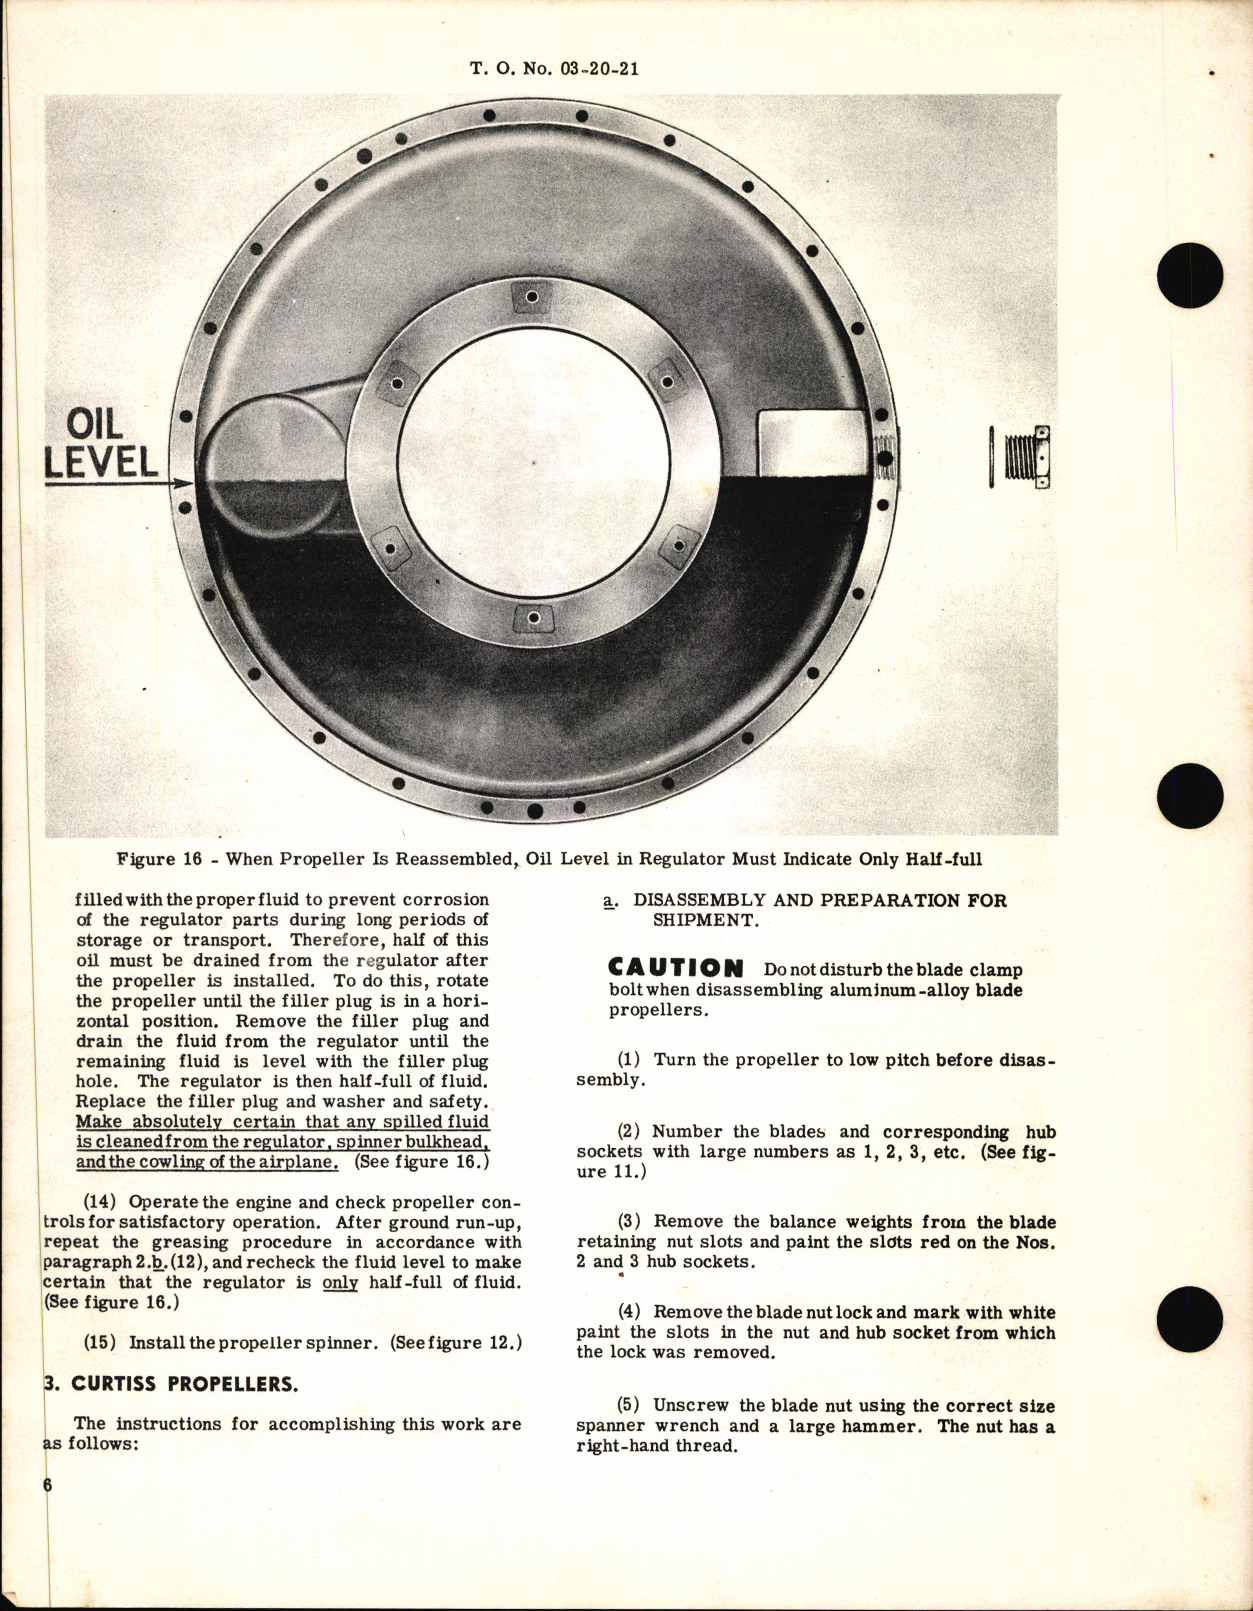 Sample page 6 from AirCorps Library document: Propellers and Accessories - Shipment of Disassembled Propellers 